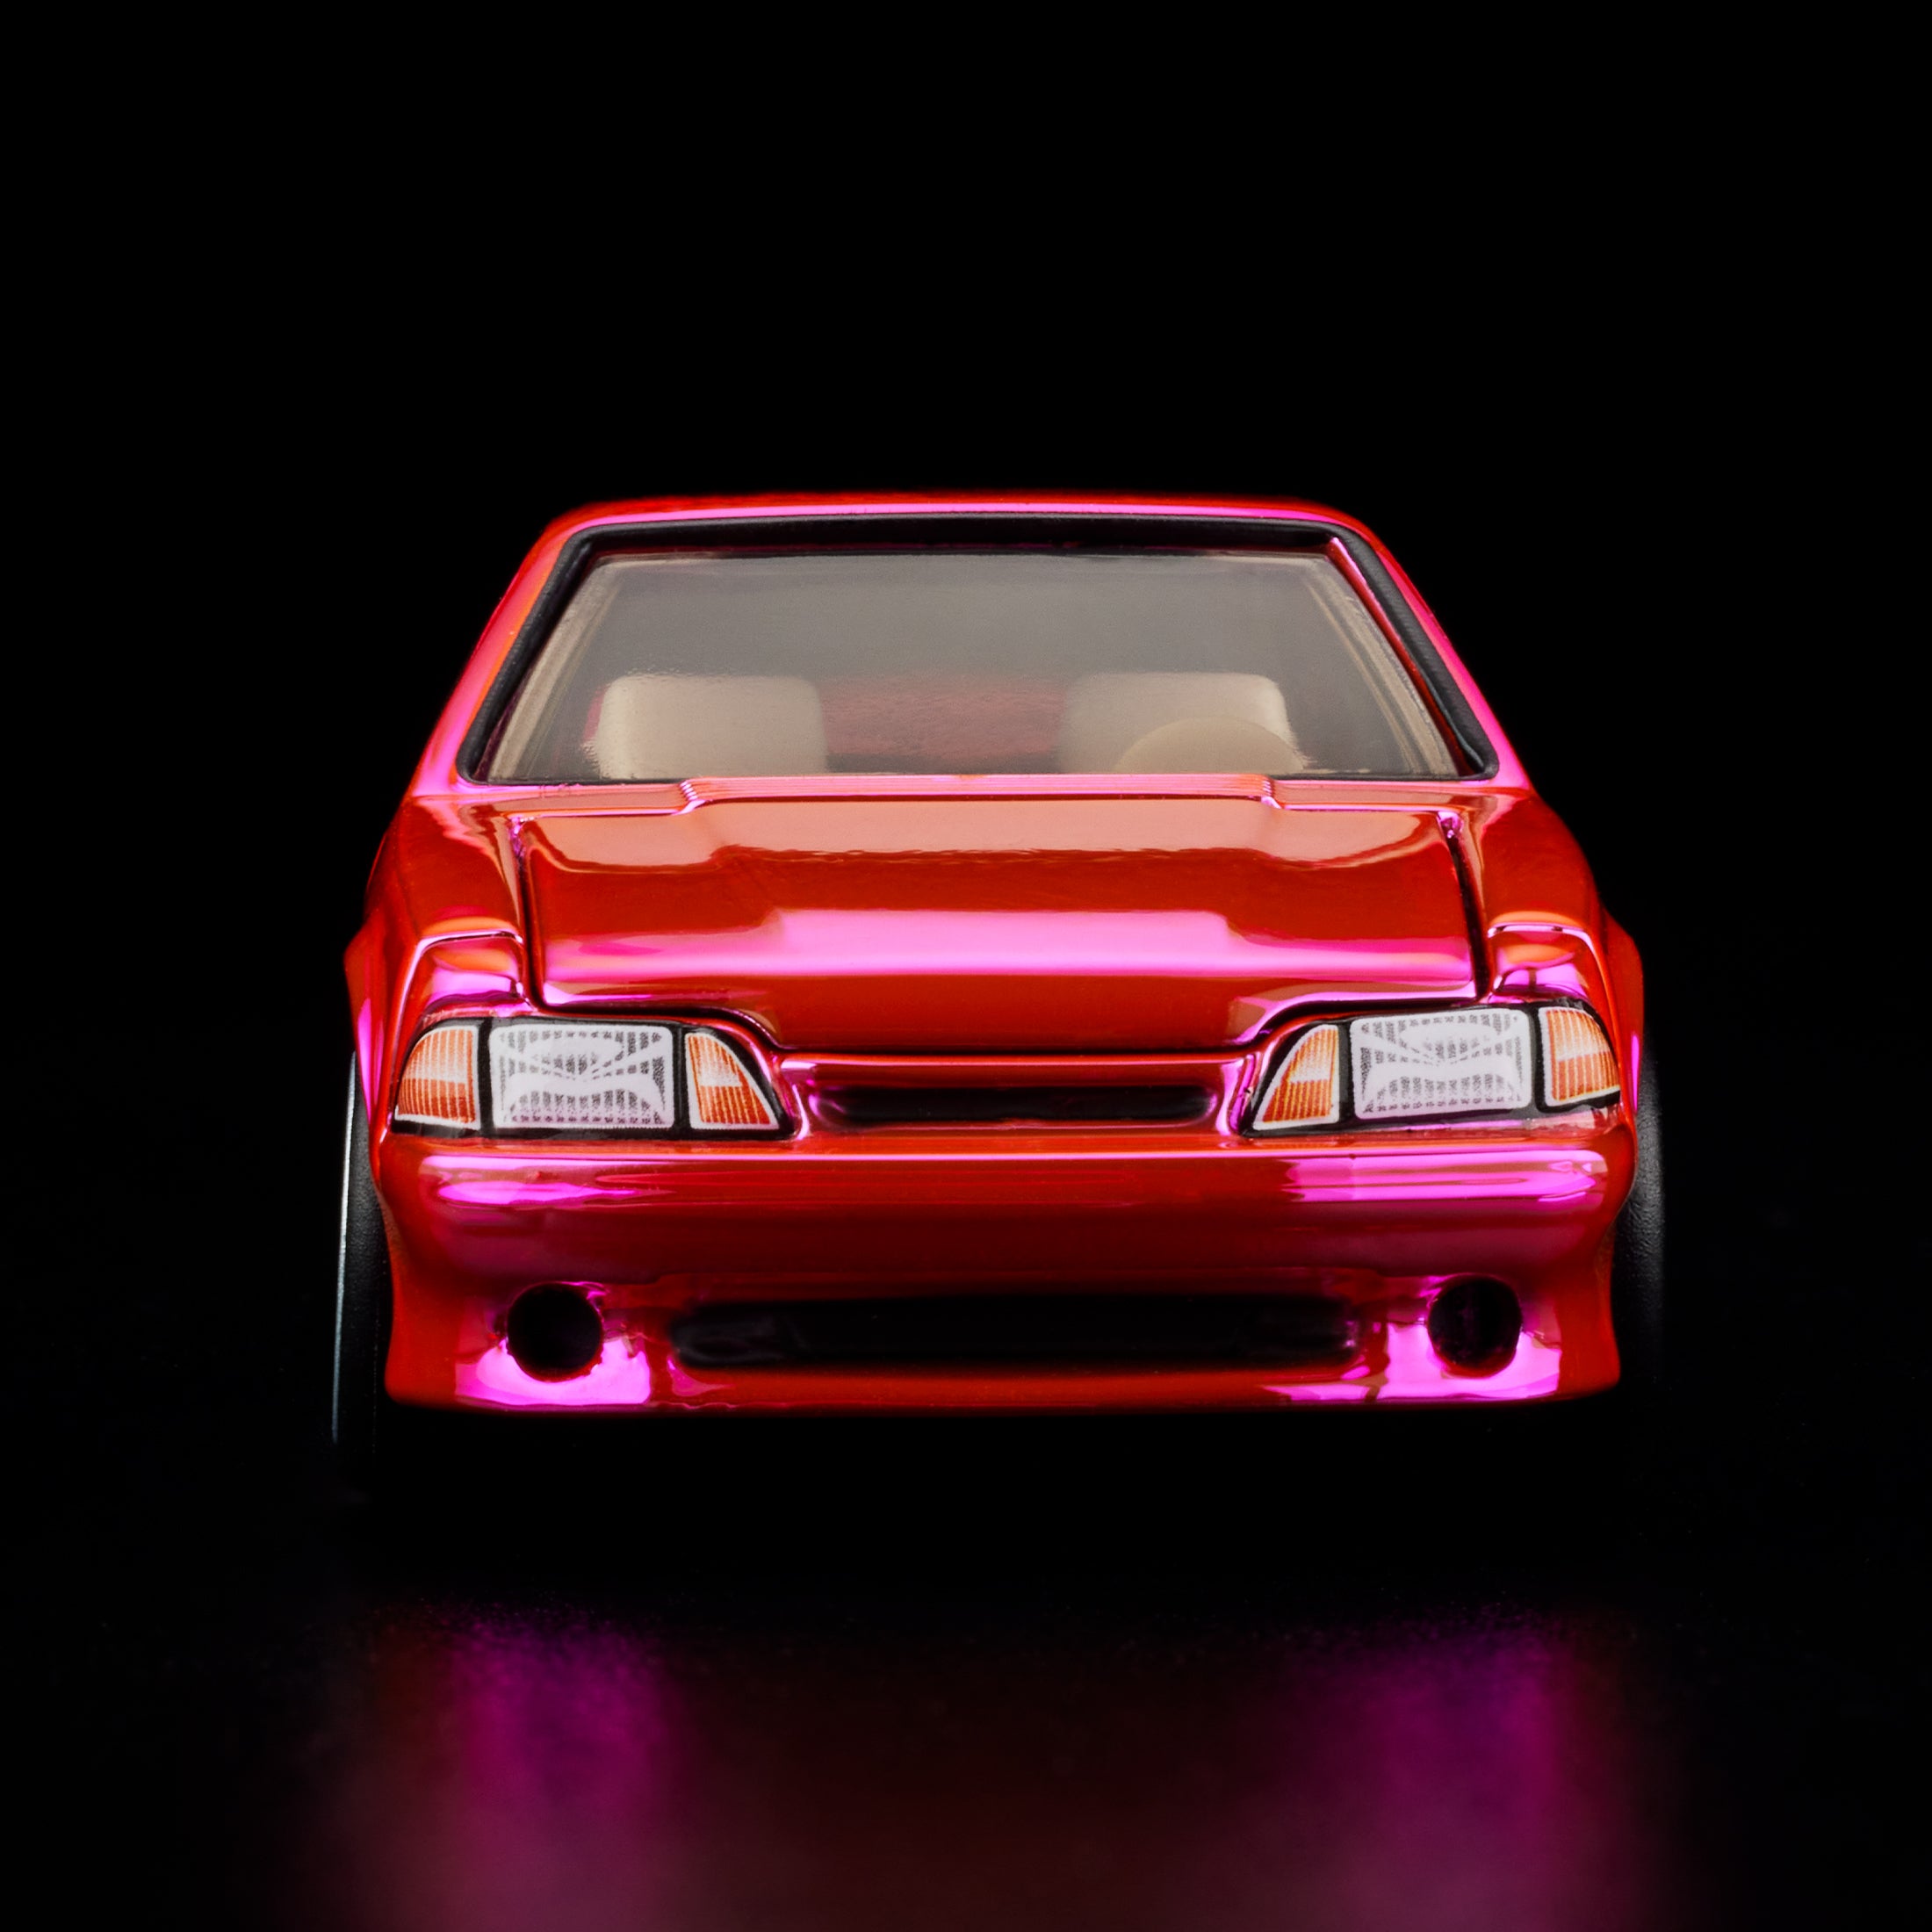 RLC Exclusive Pink Edition 1993 Ford Mustang Cobra R